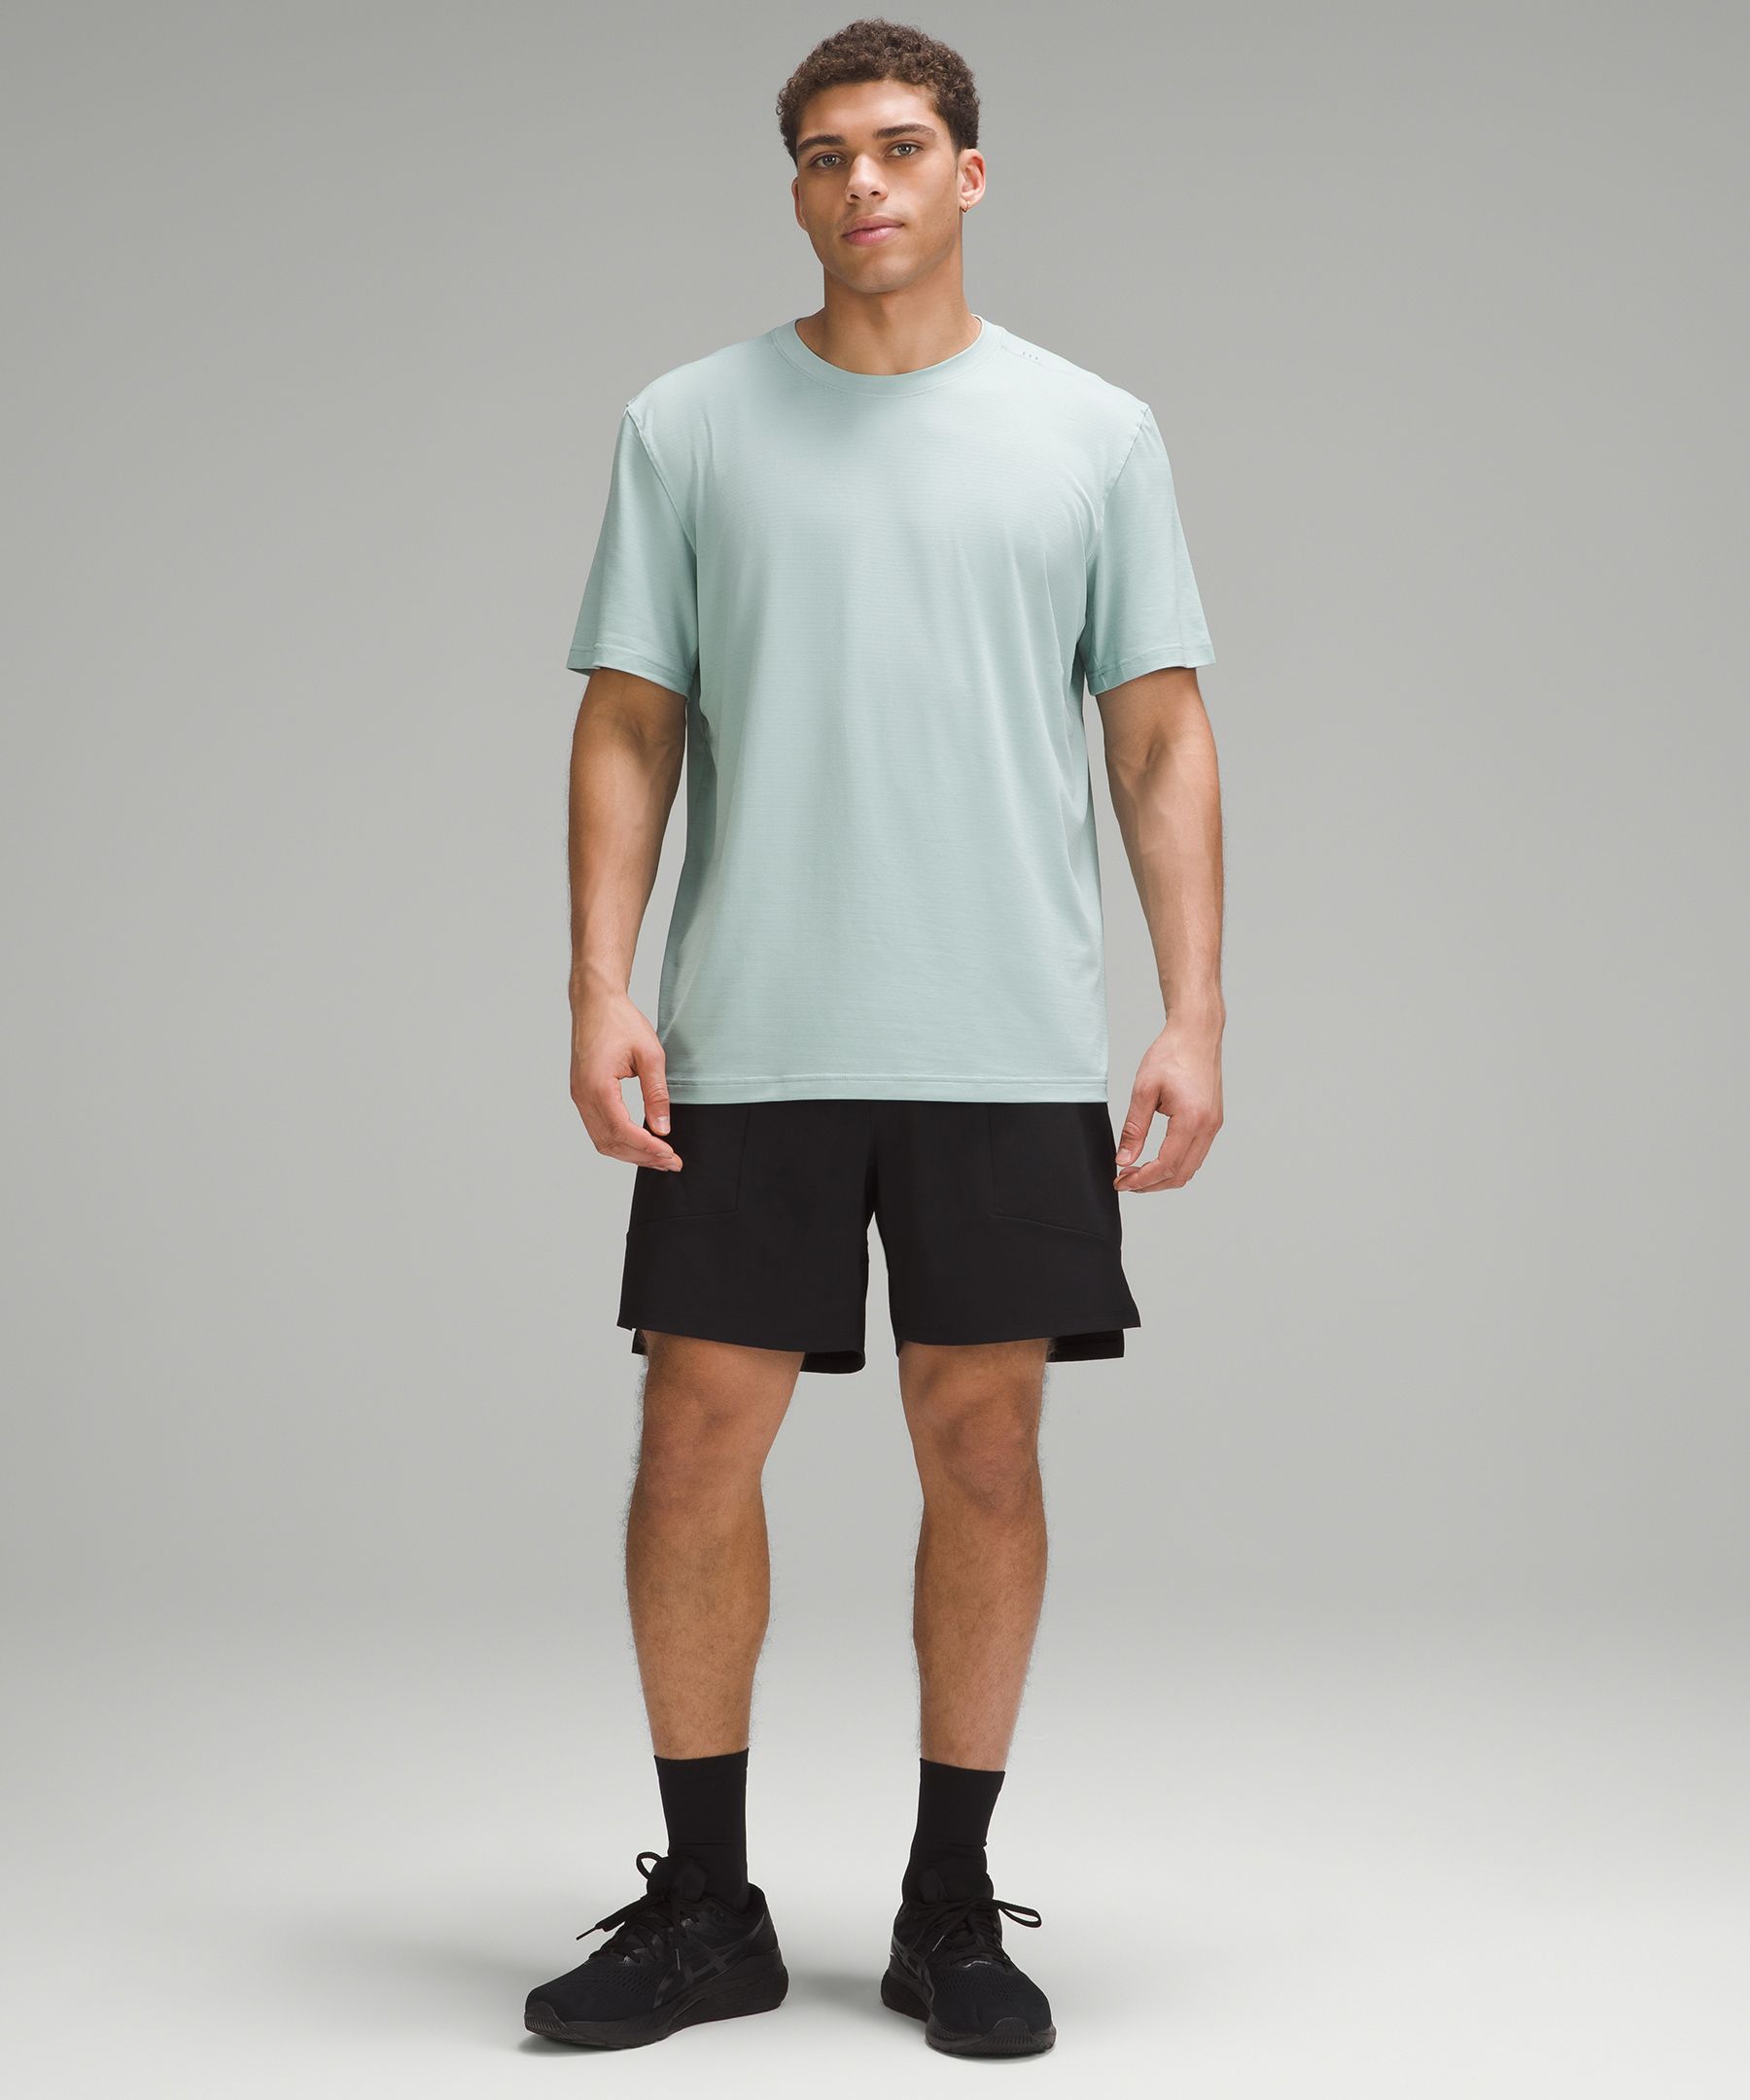 License to Train Relaxed Short-Sleeve Shirt | Men's Short Sleeve Shirts & Tee's